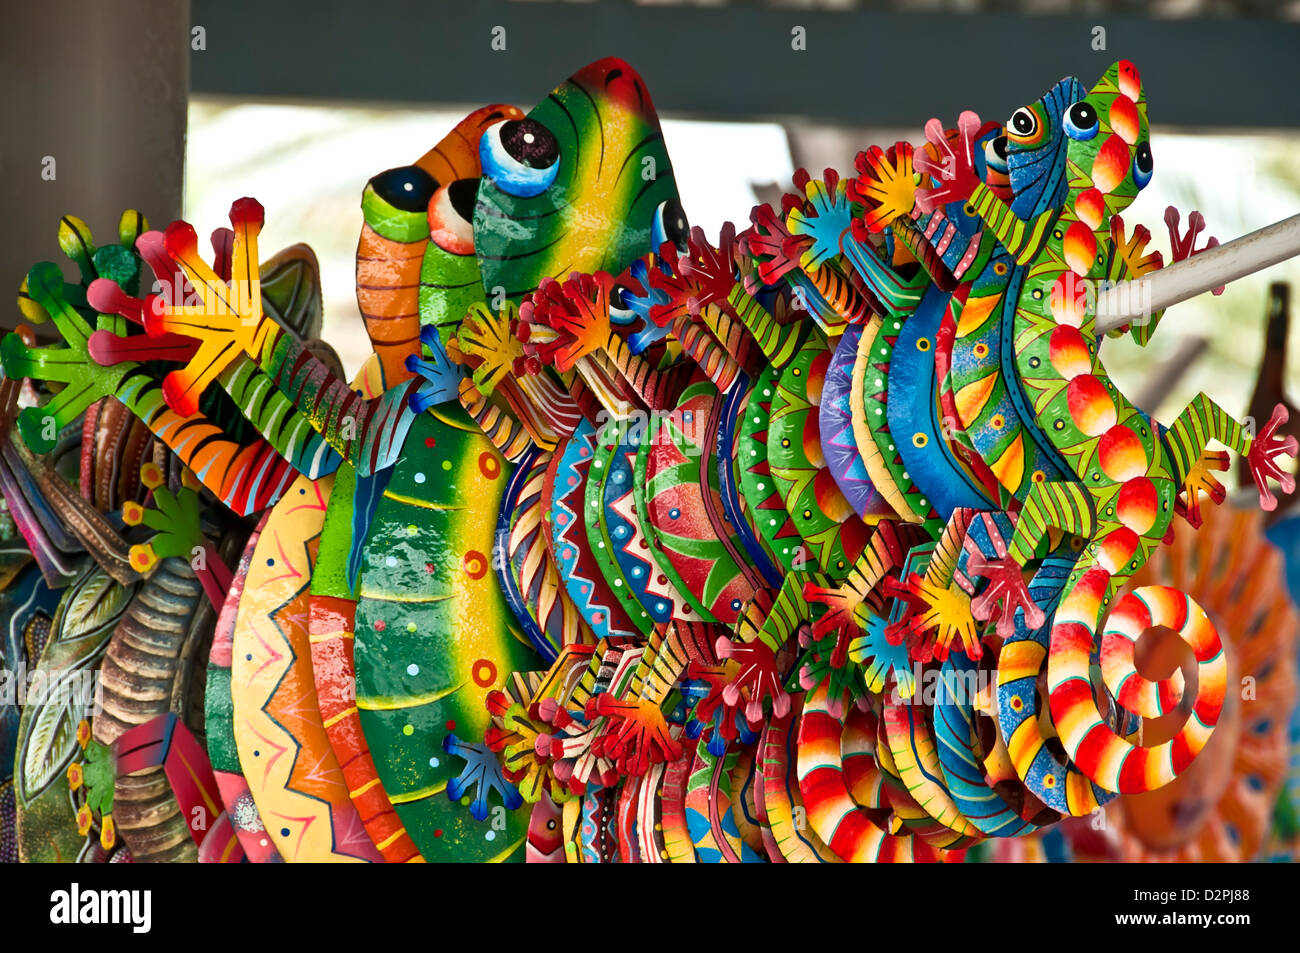 Colorful toy iguana souvenirs shopping, Willemstad, Curacao Stock Photo